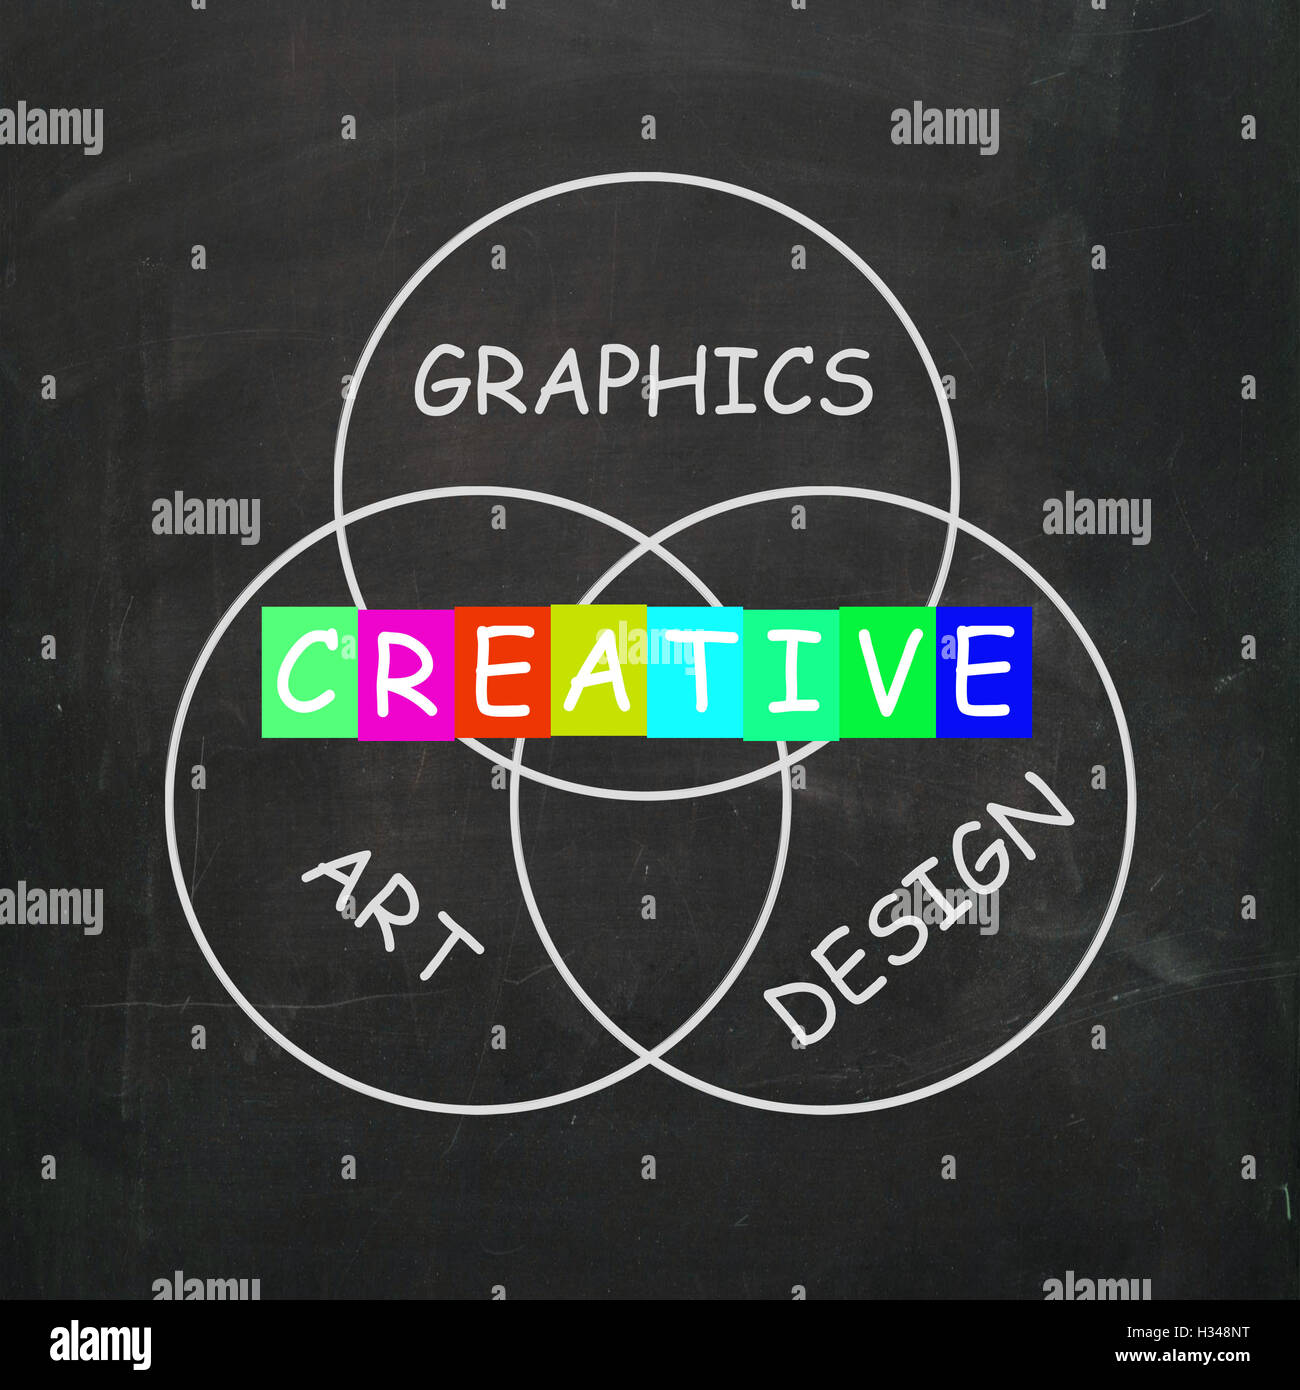 Creative Choices Refer to Graphics Art Design and Creativity Stock Photo